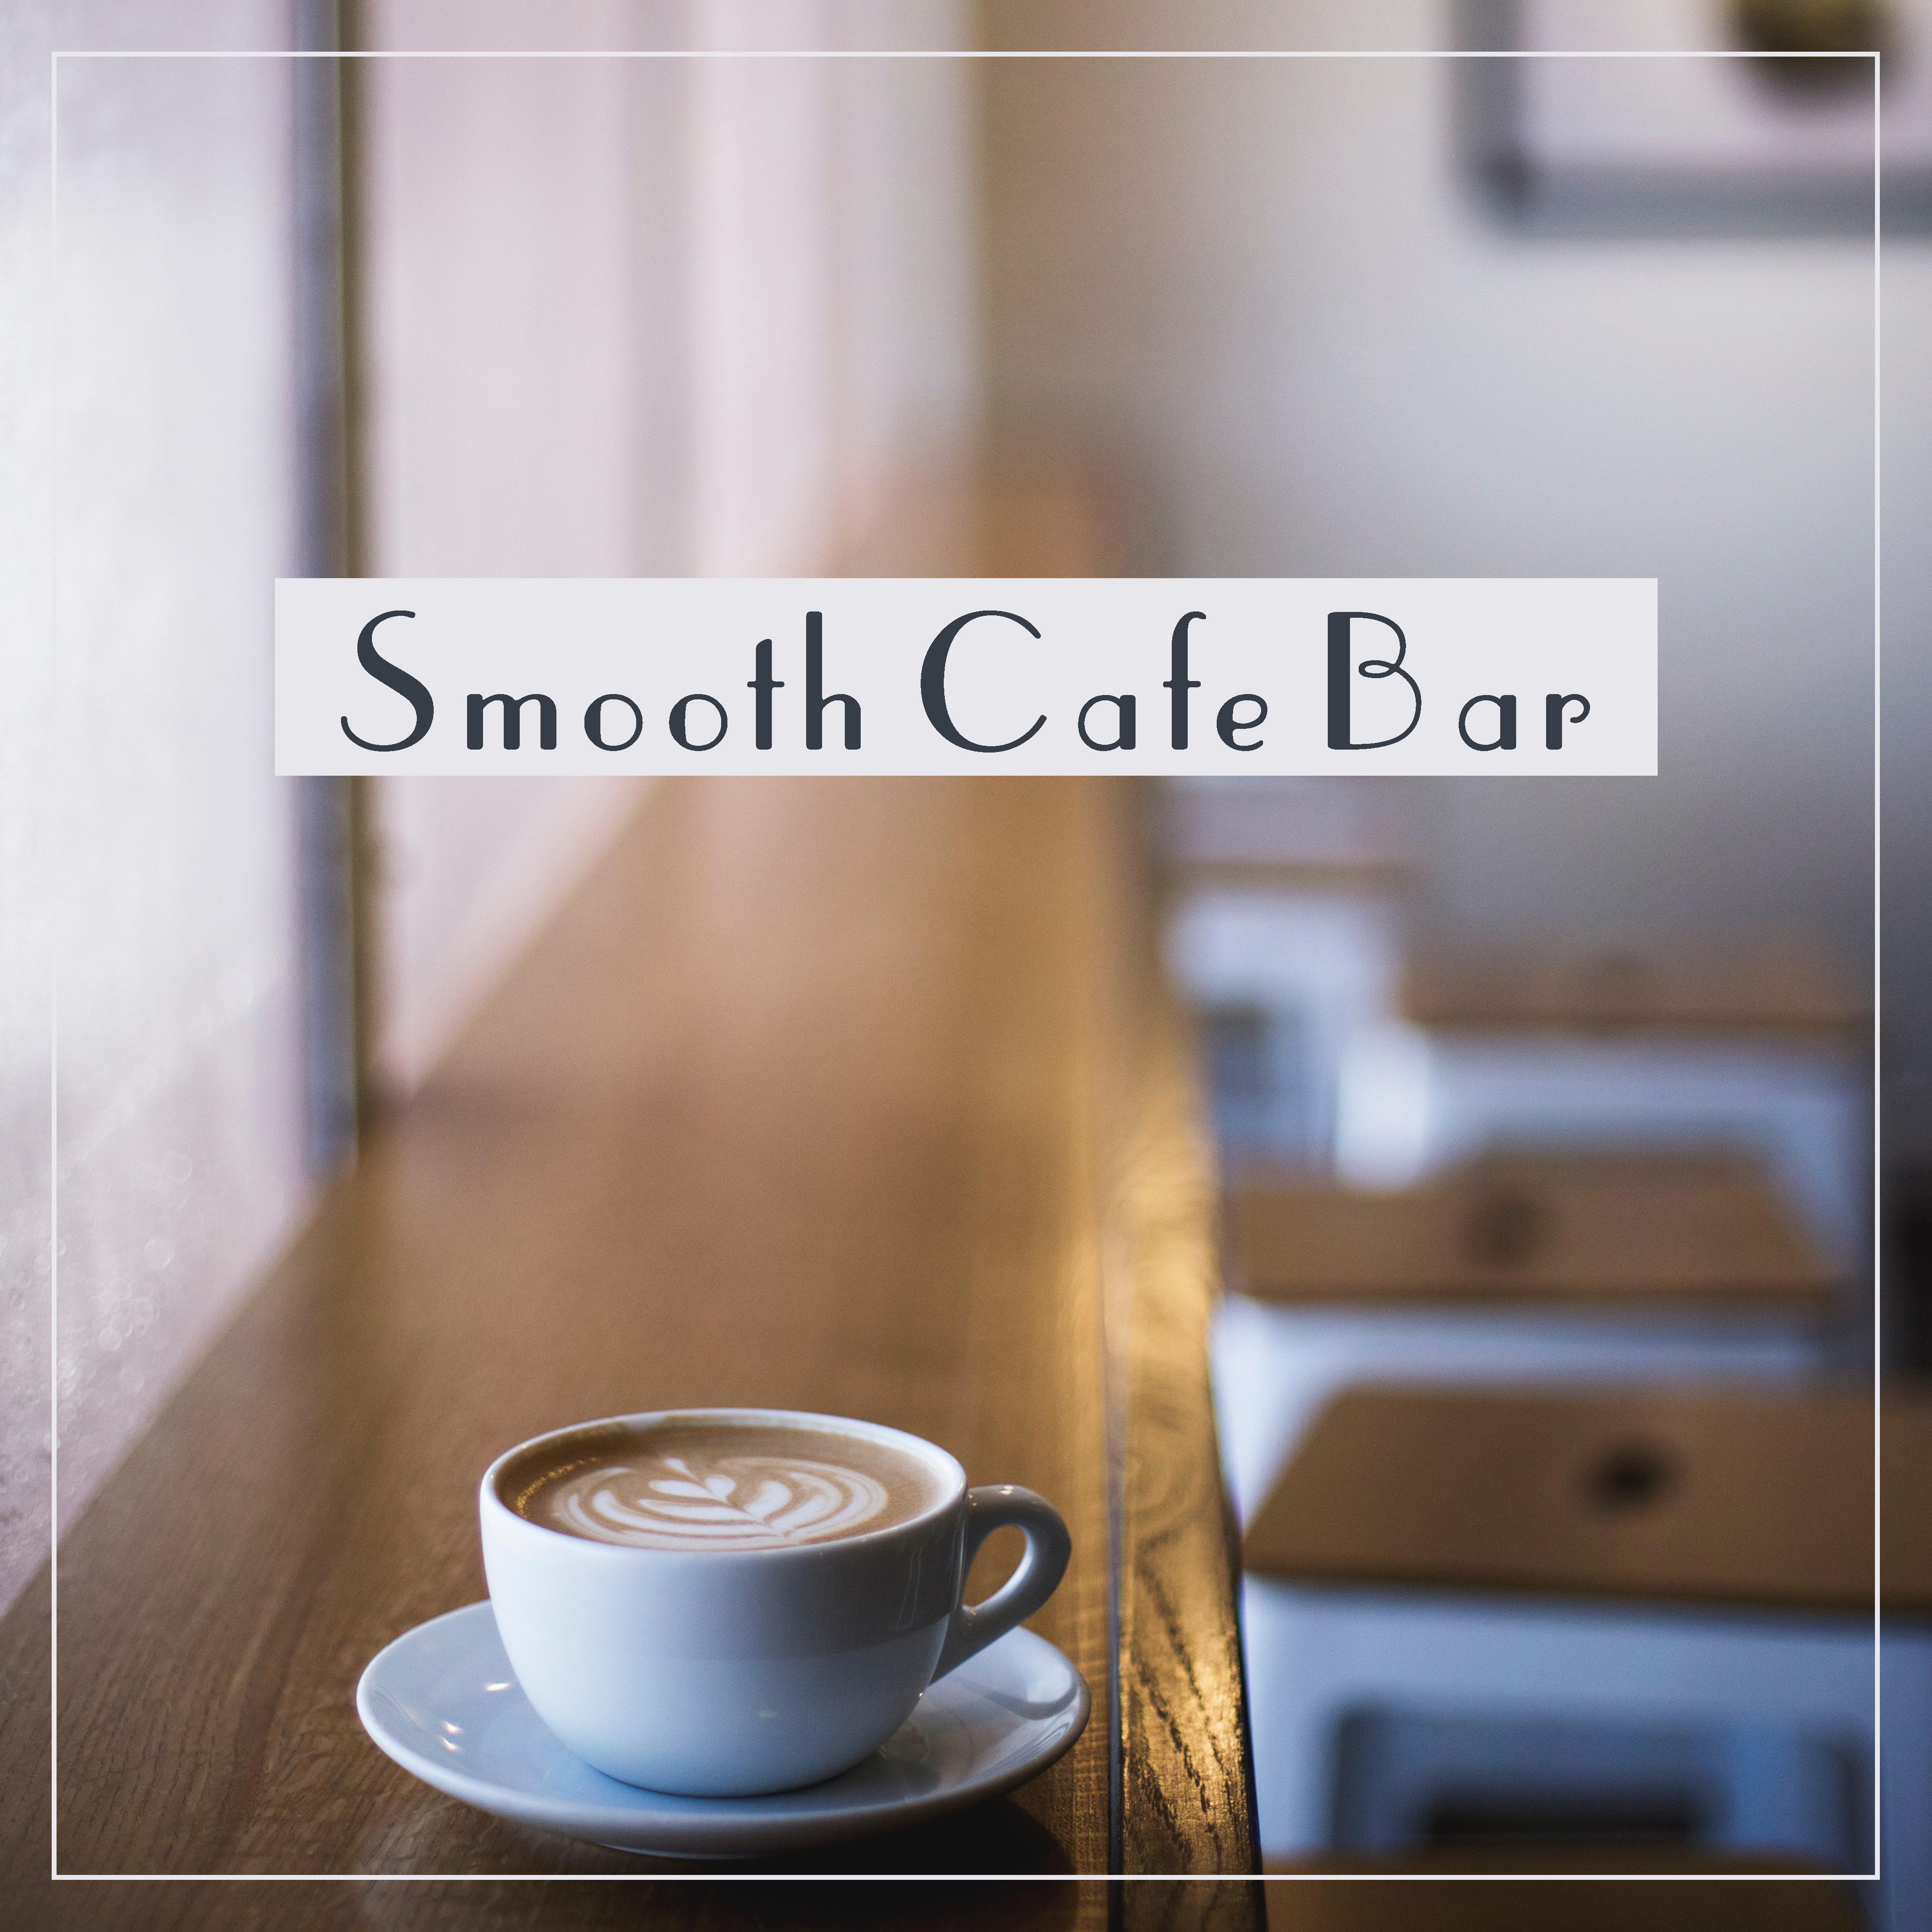 Smooth Cafe Bar  Instrumental Songs to Rest, Piano Bar, Coffee Talk, Jazz Cafe, Calm Down